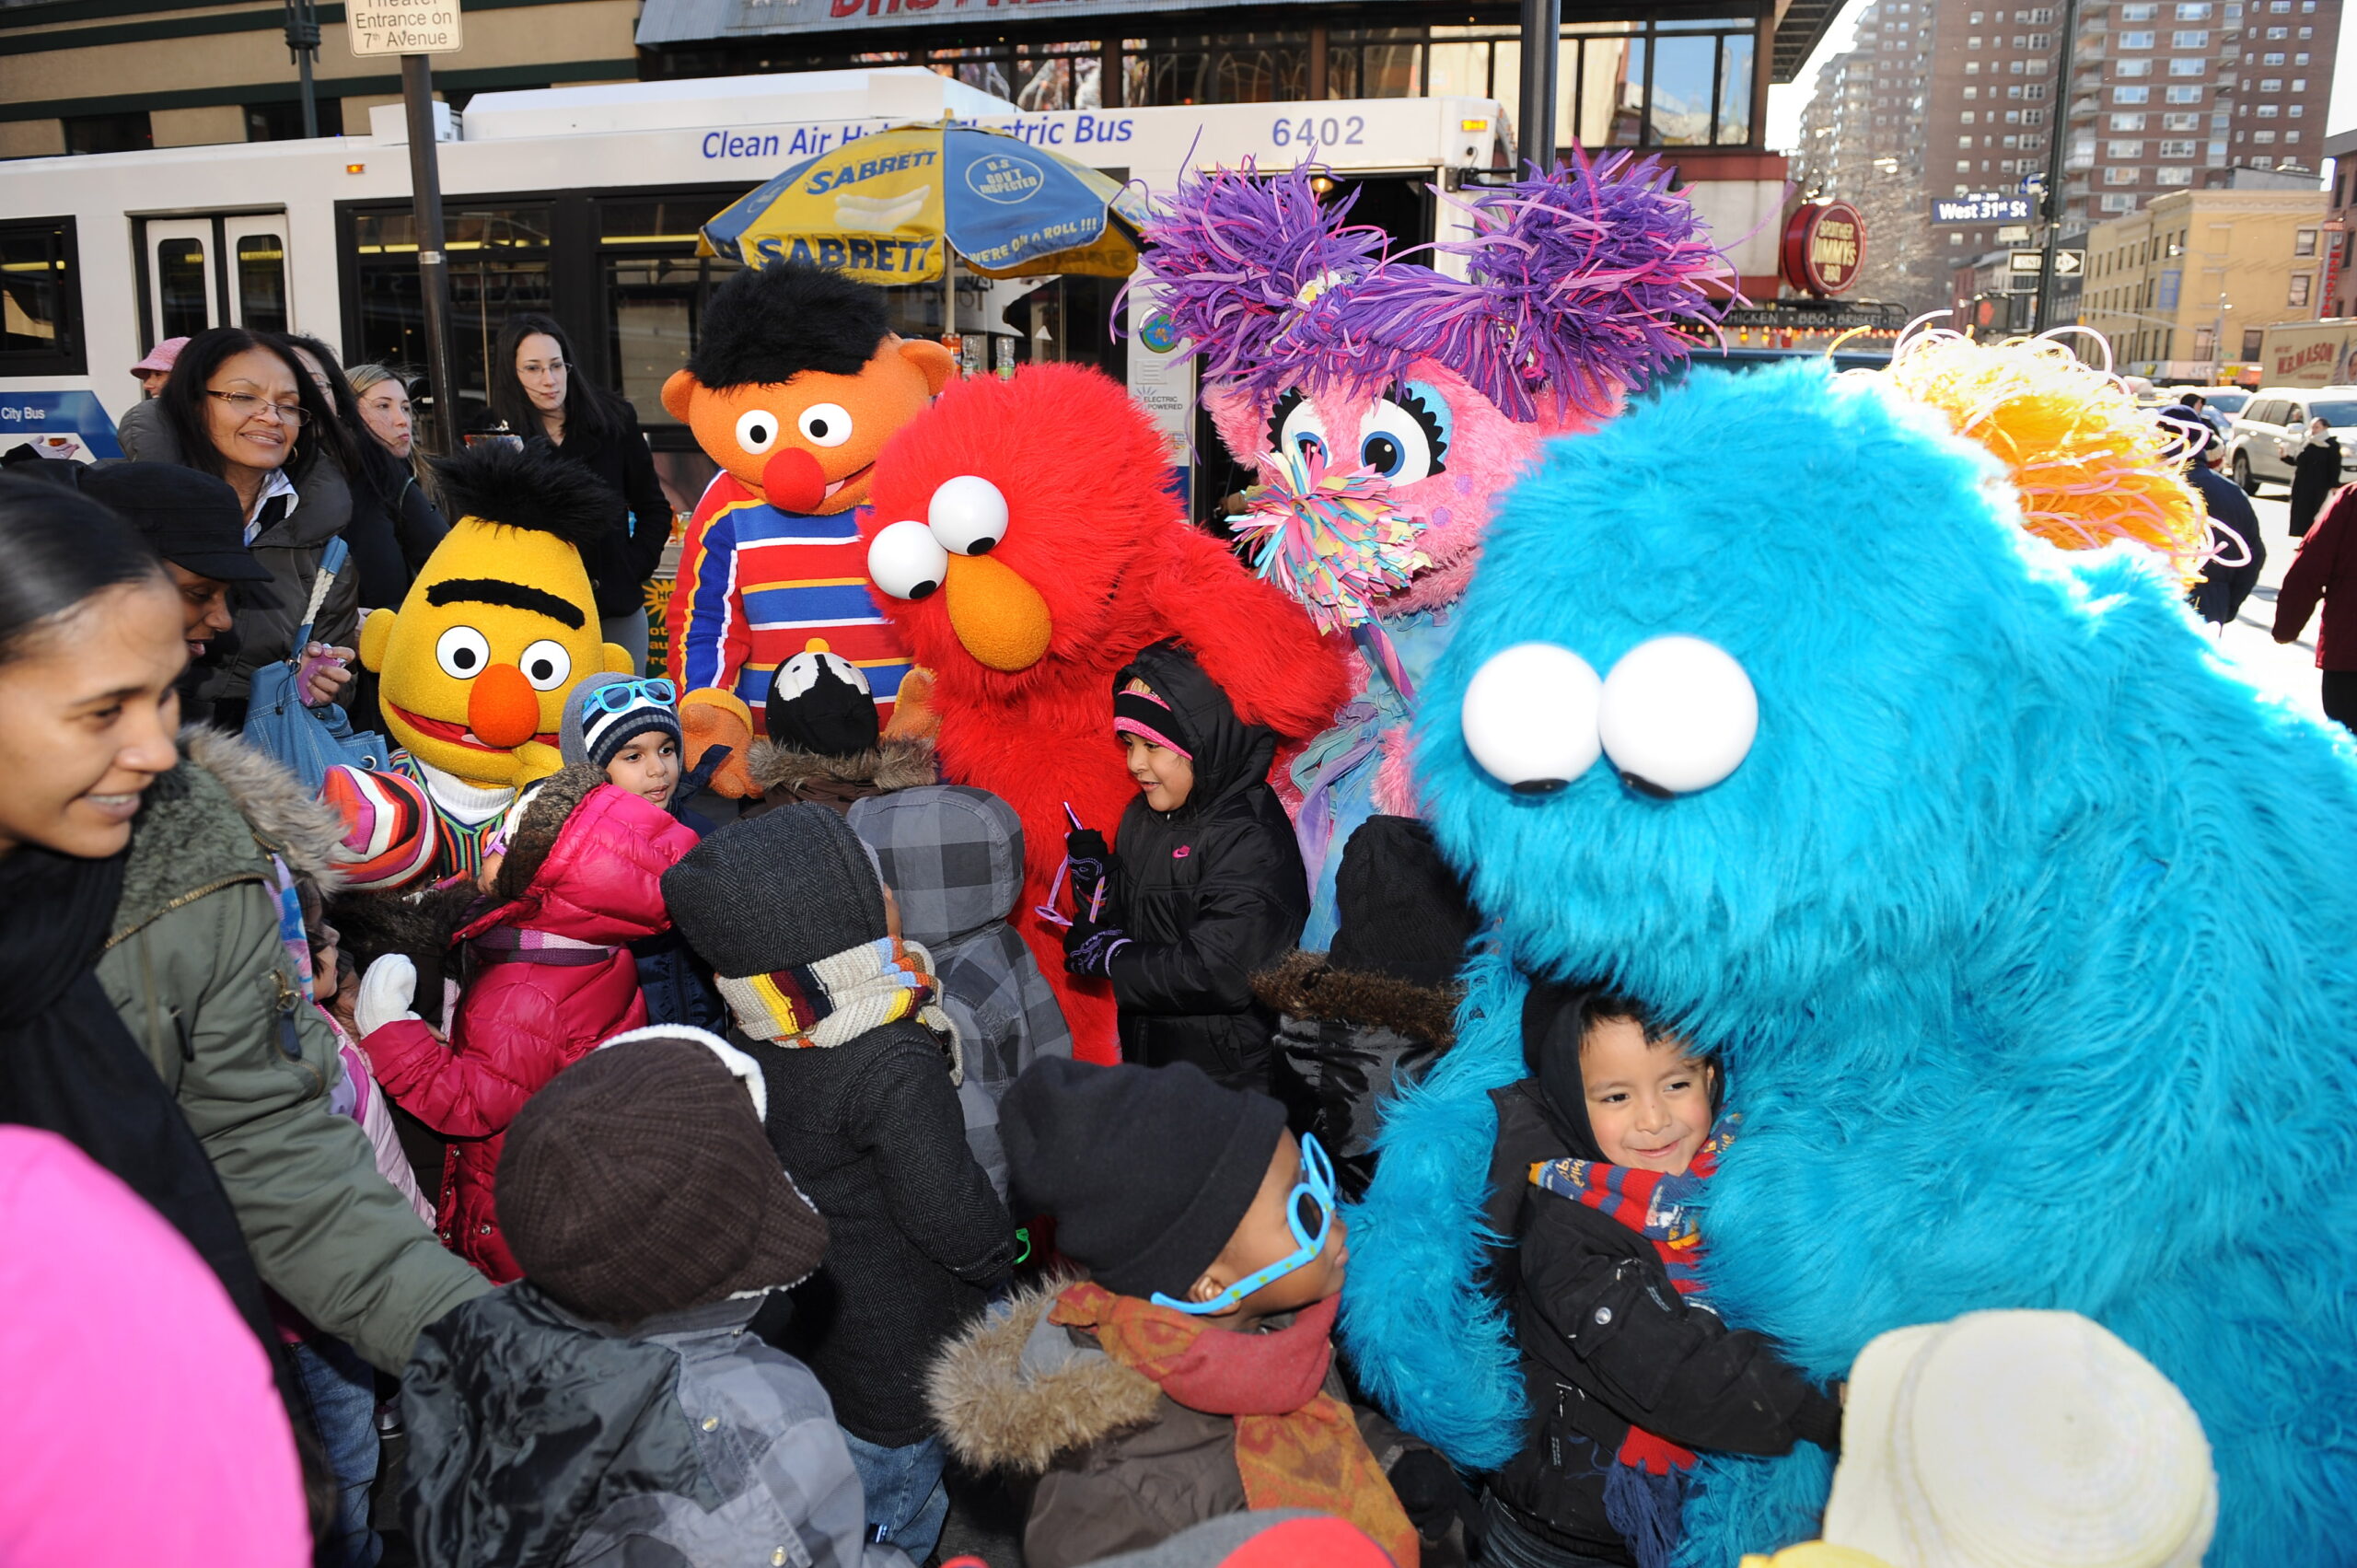 a crowd of children take pictures with people wearing Elmo, Cookie Monster and other Sesame Street character costumes